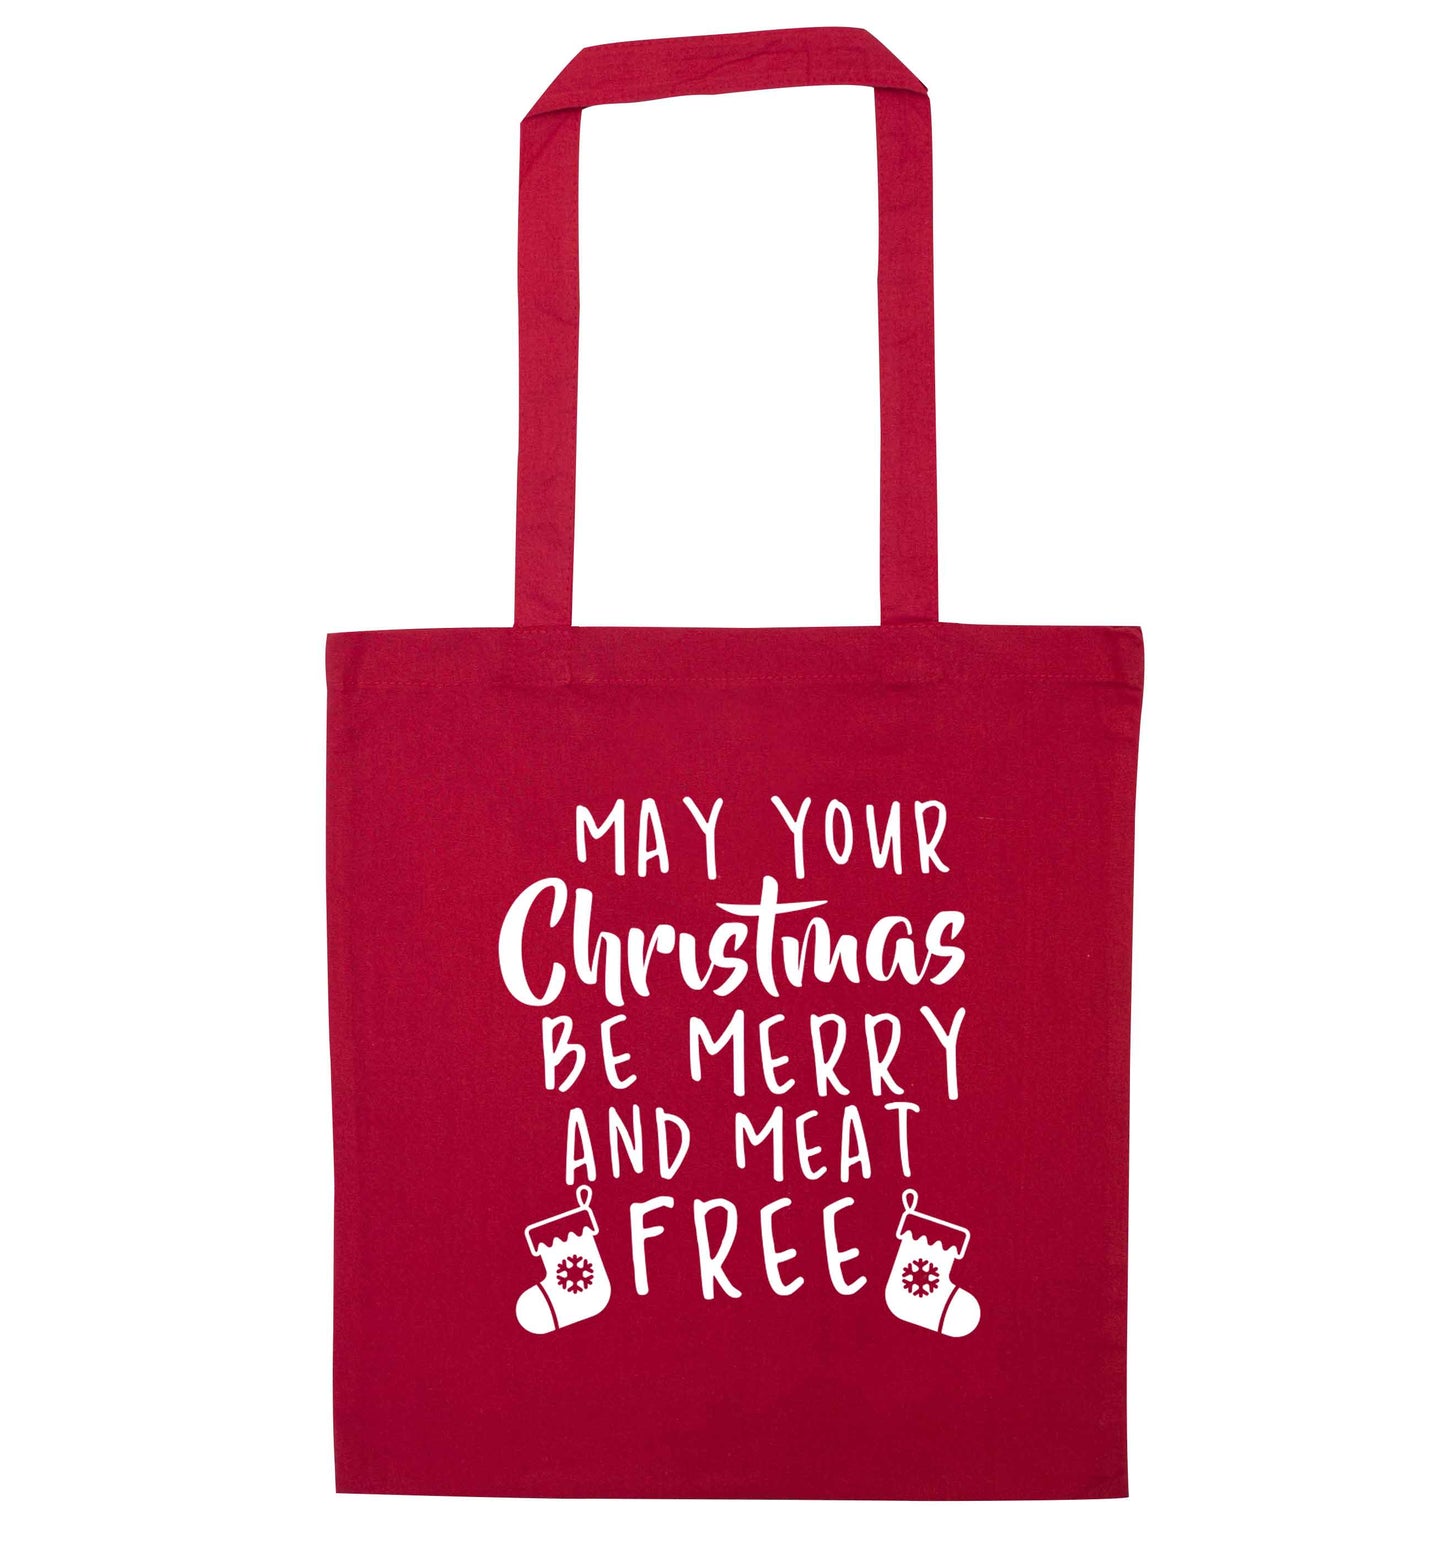 May your Christmas be merry and meat free red tote bag